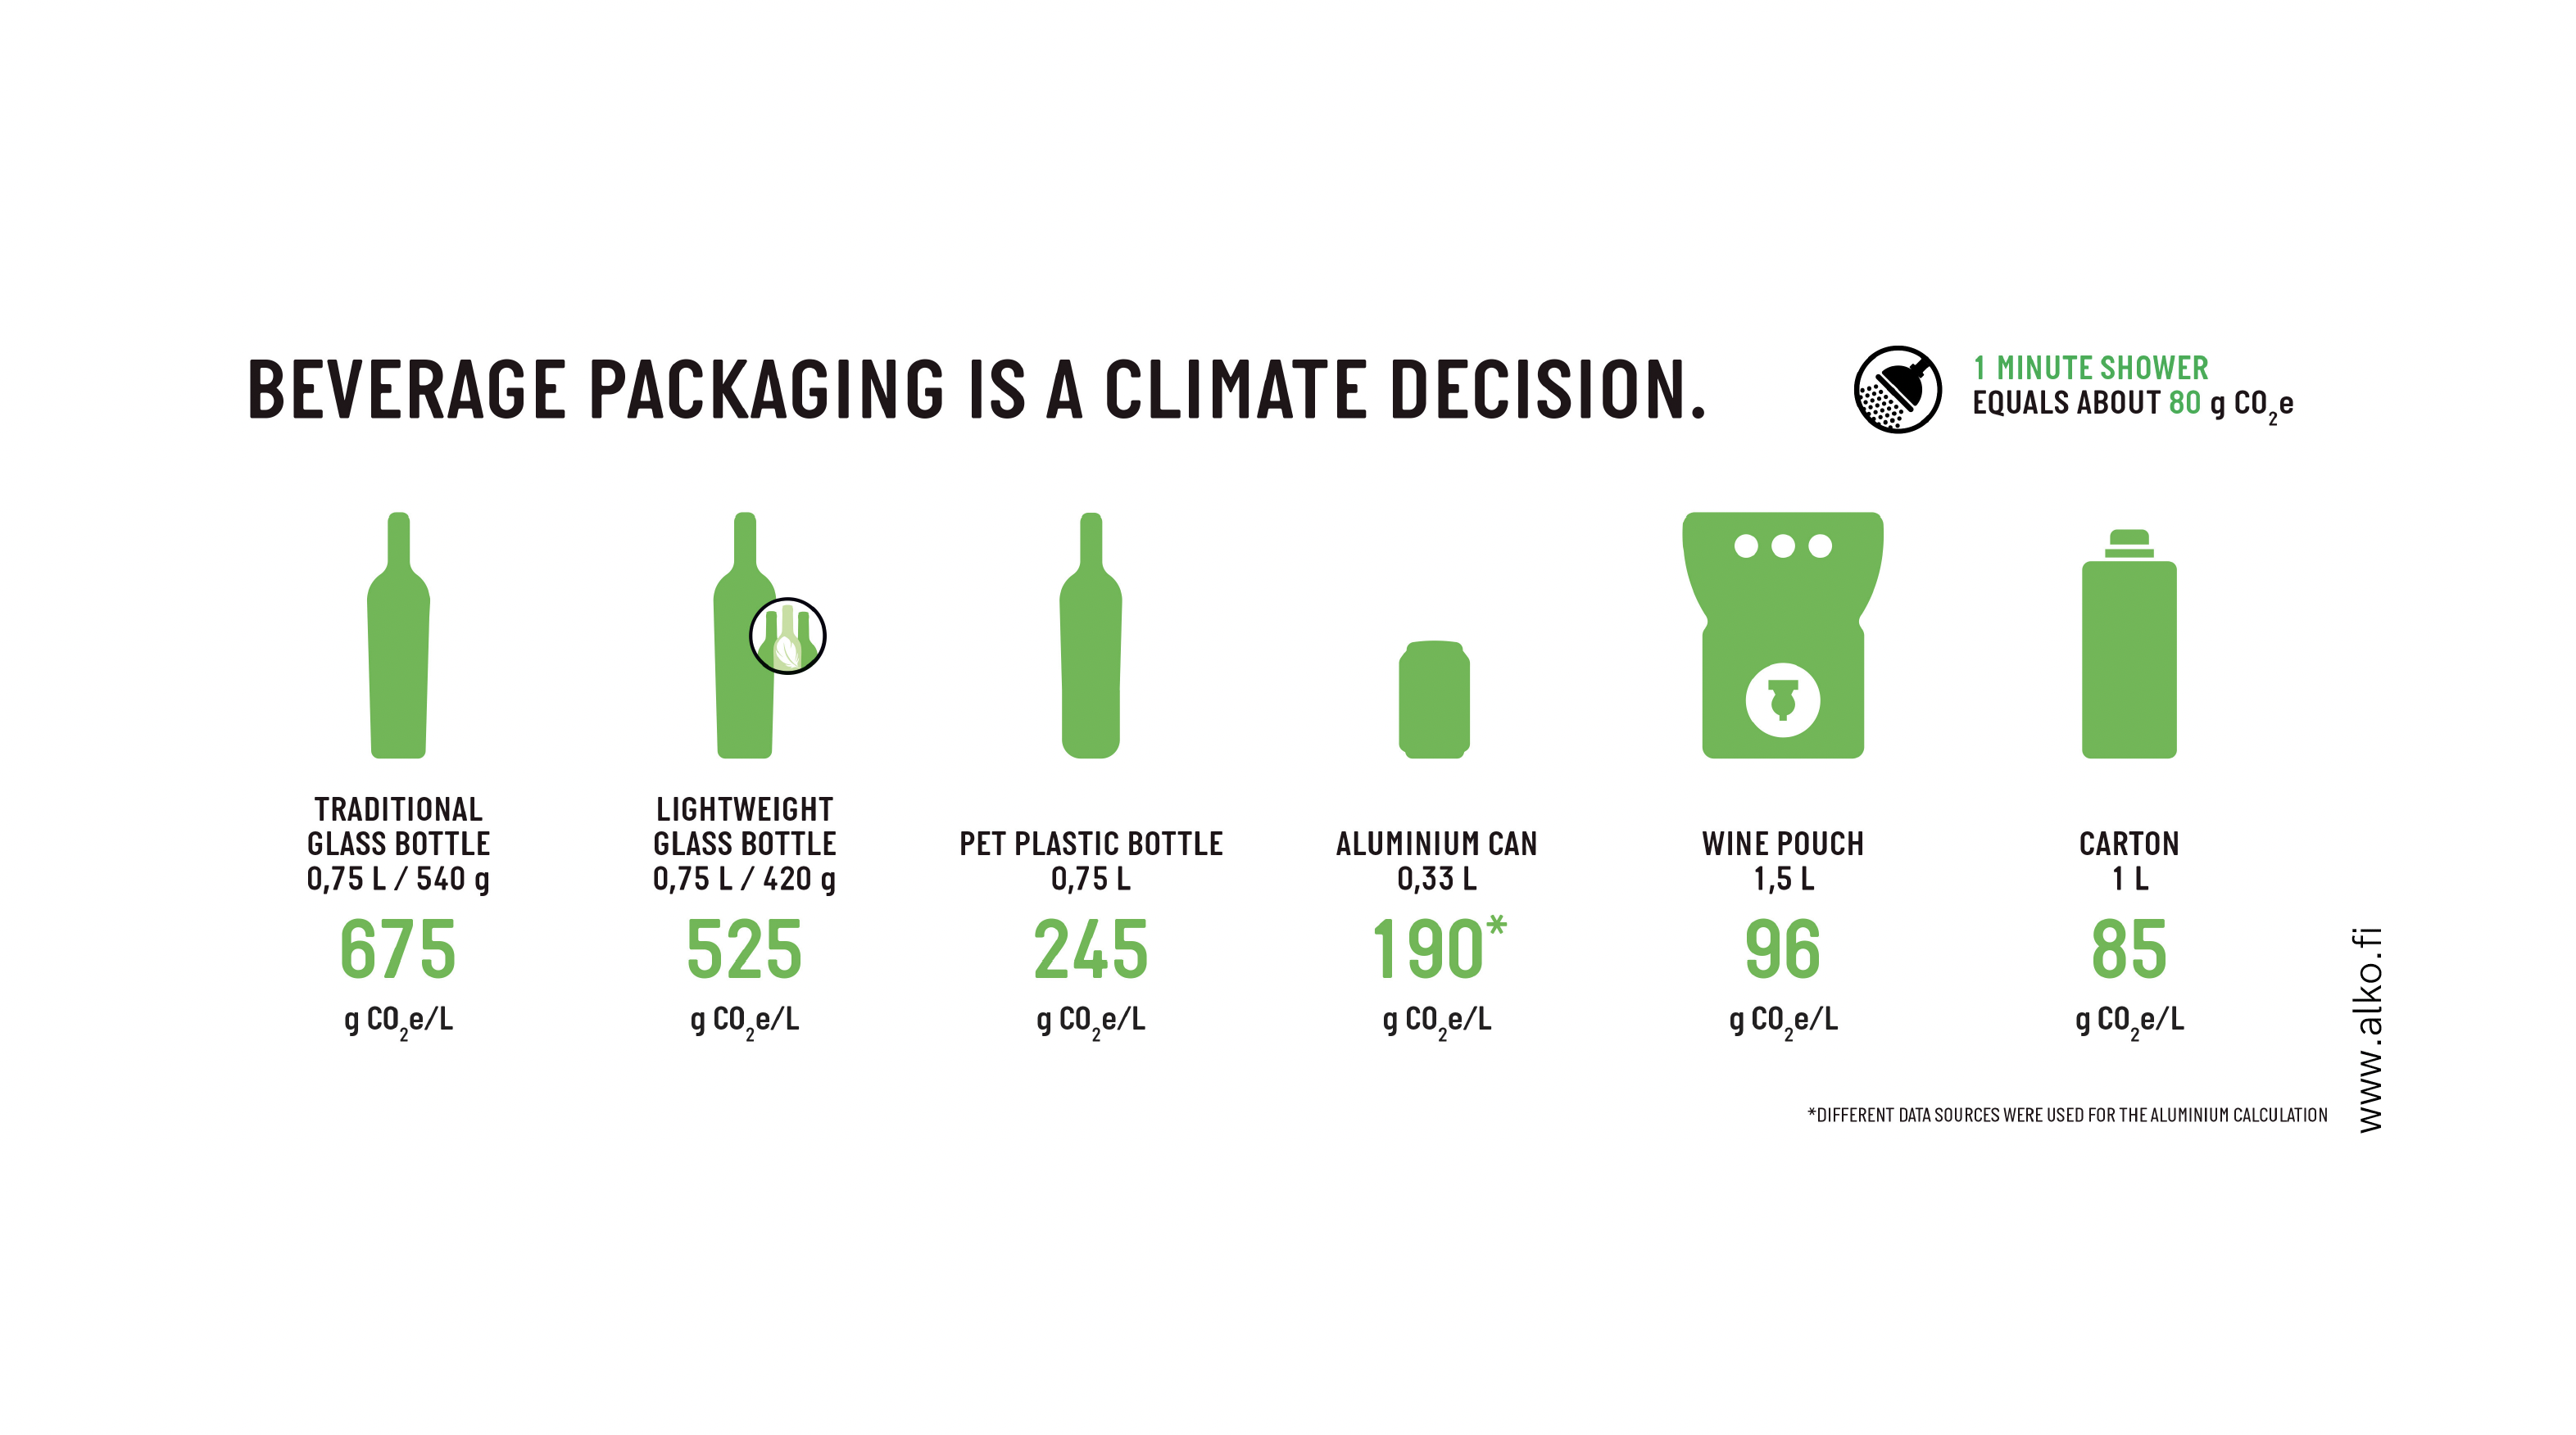 Comparing the environmental impact of different beverage packaging. A study published by Alko. 